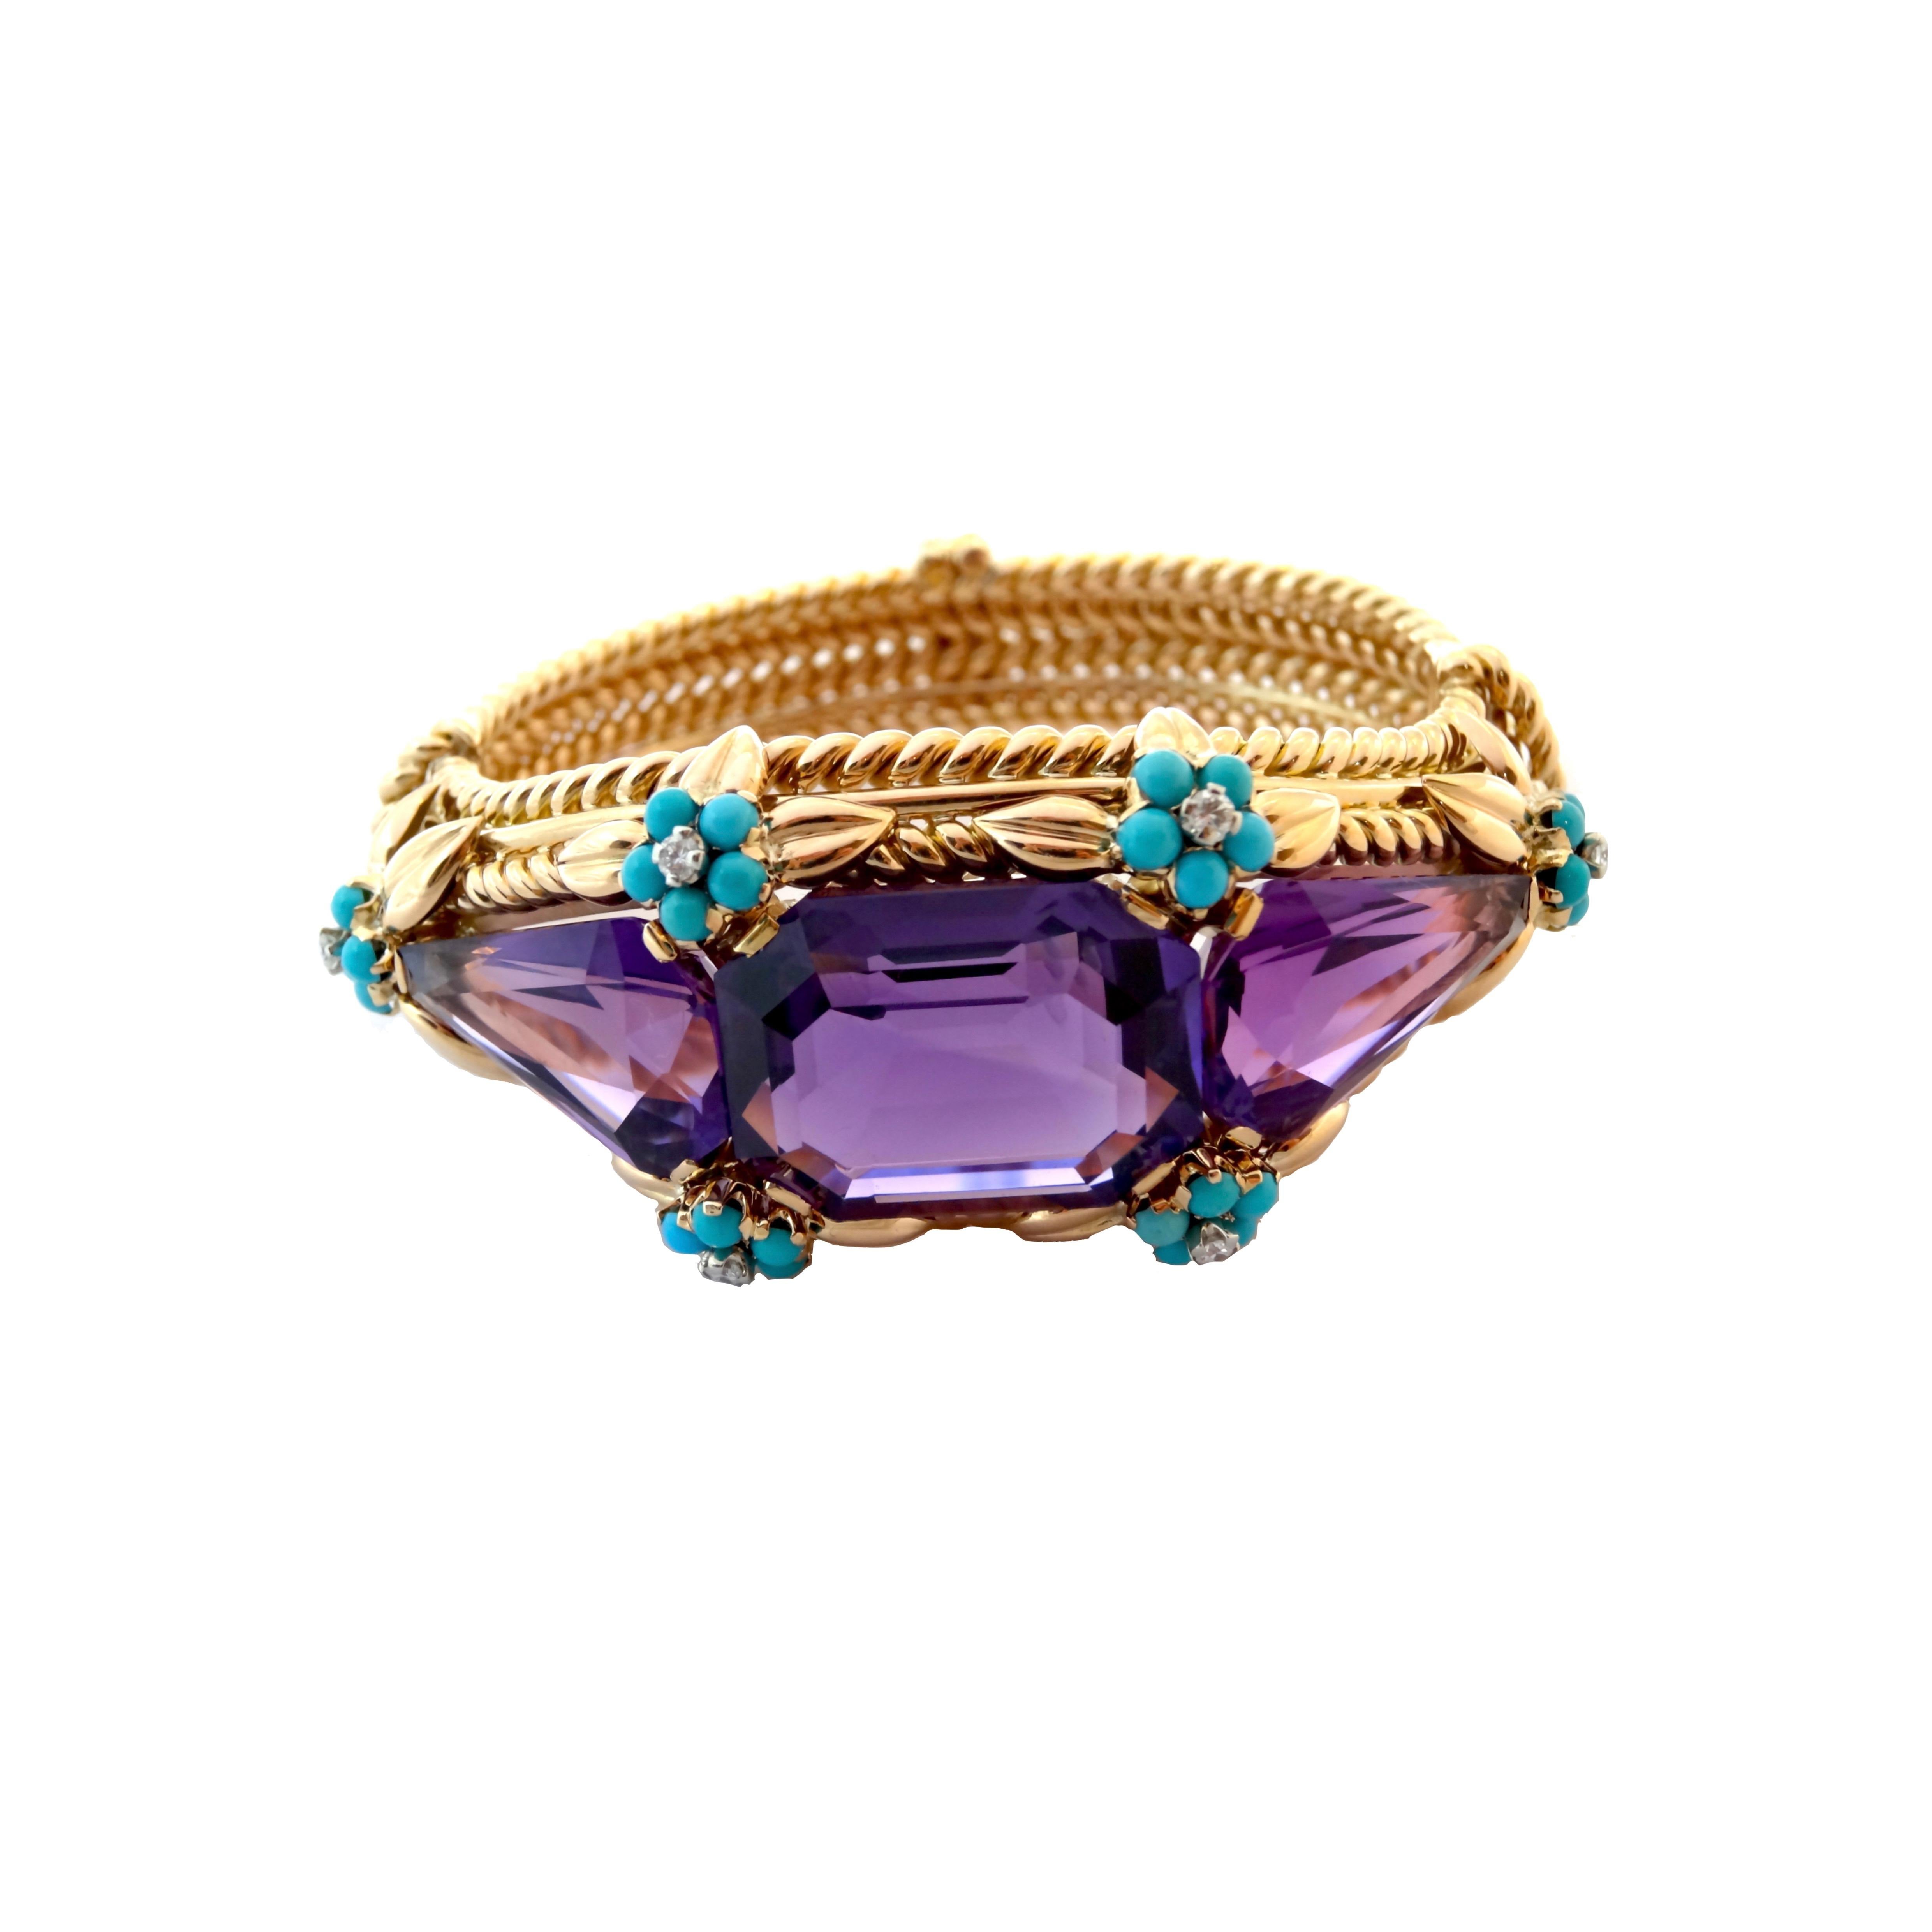 14K yellow gold bracelet set on its center with importants amethysts, and on the sides, diamonds and turquoises stylizing flowers.
Year : 1950 - 1960
Diameter : 17,5 cm
(112.8 grs)
